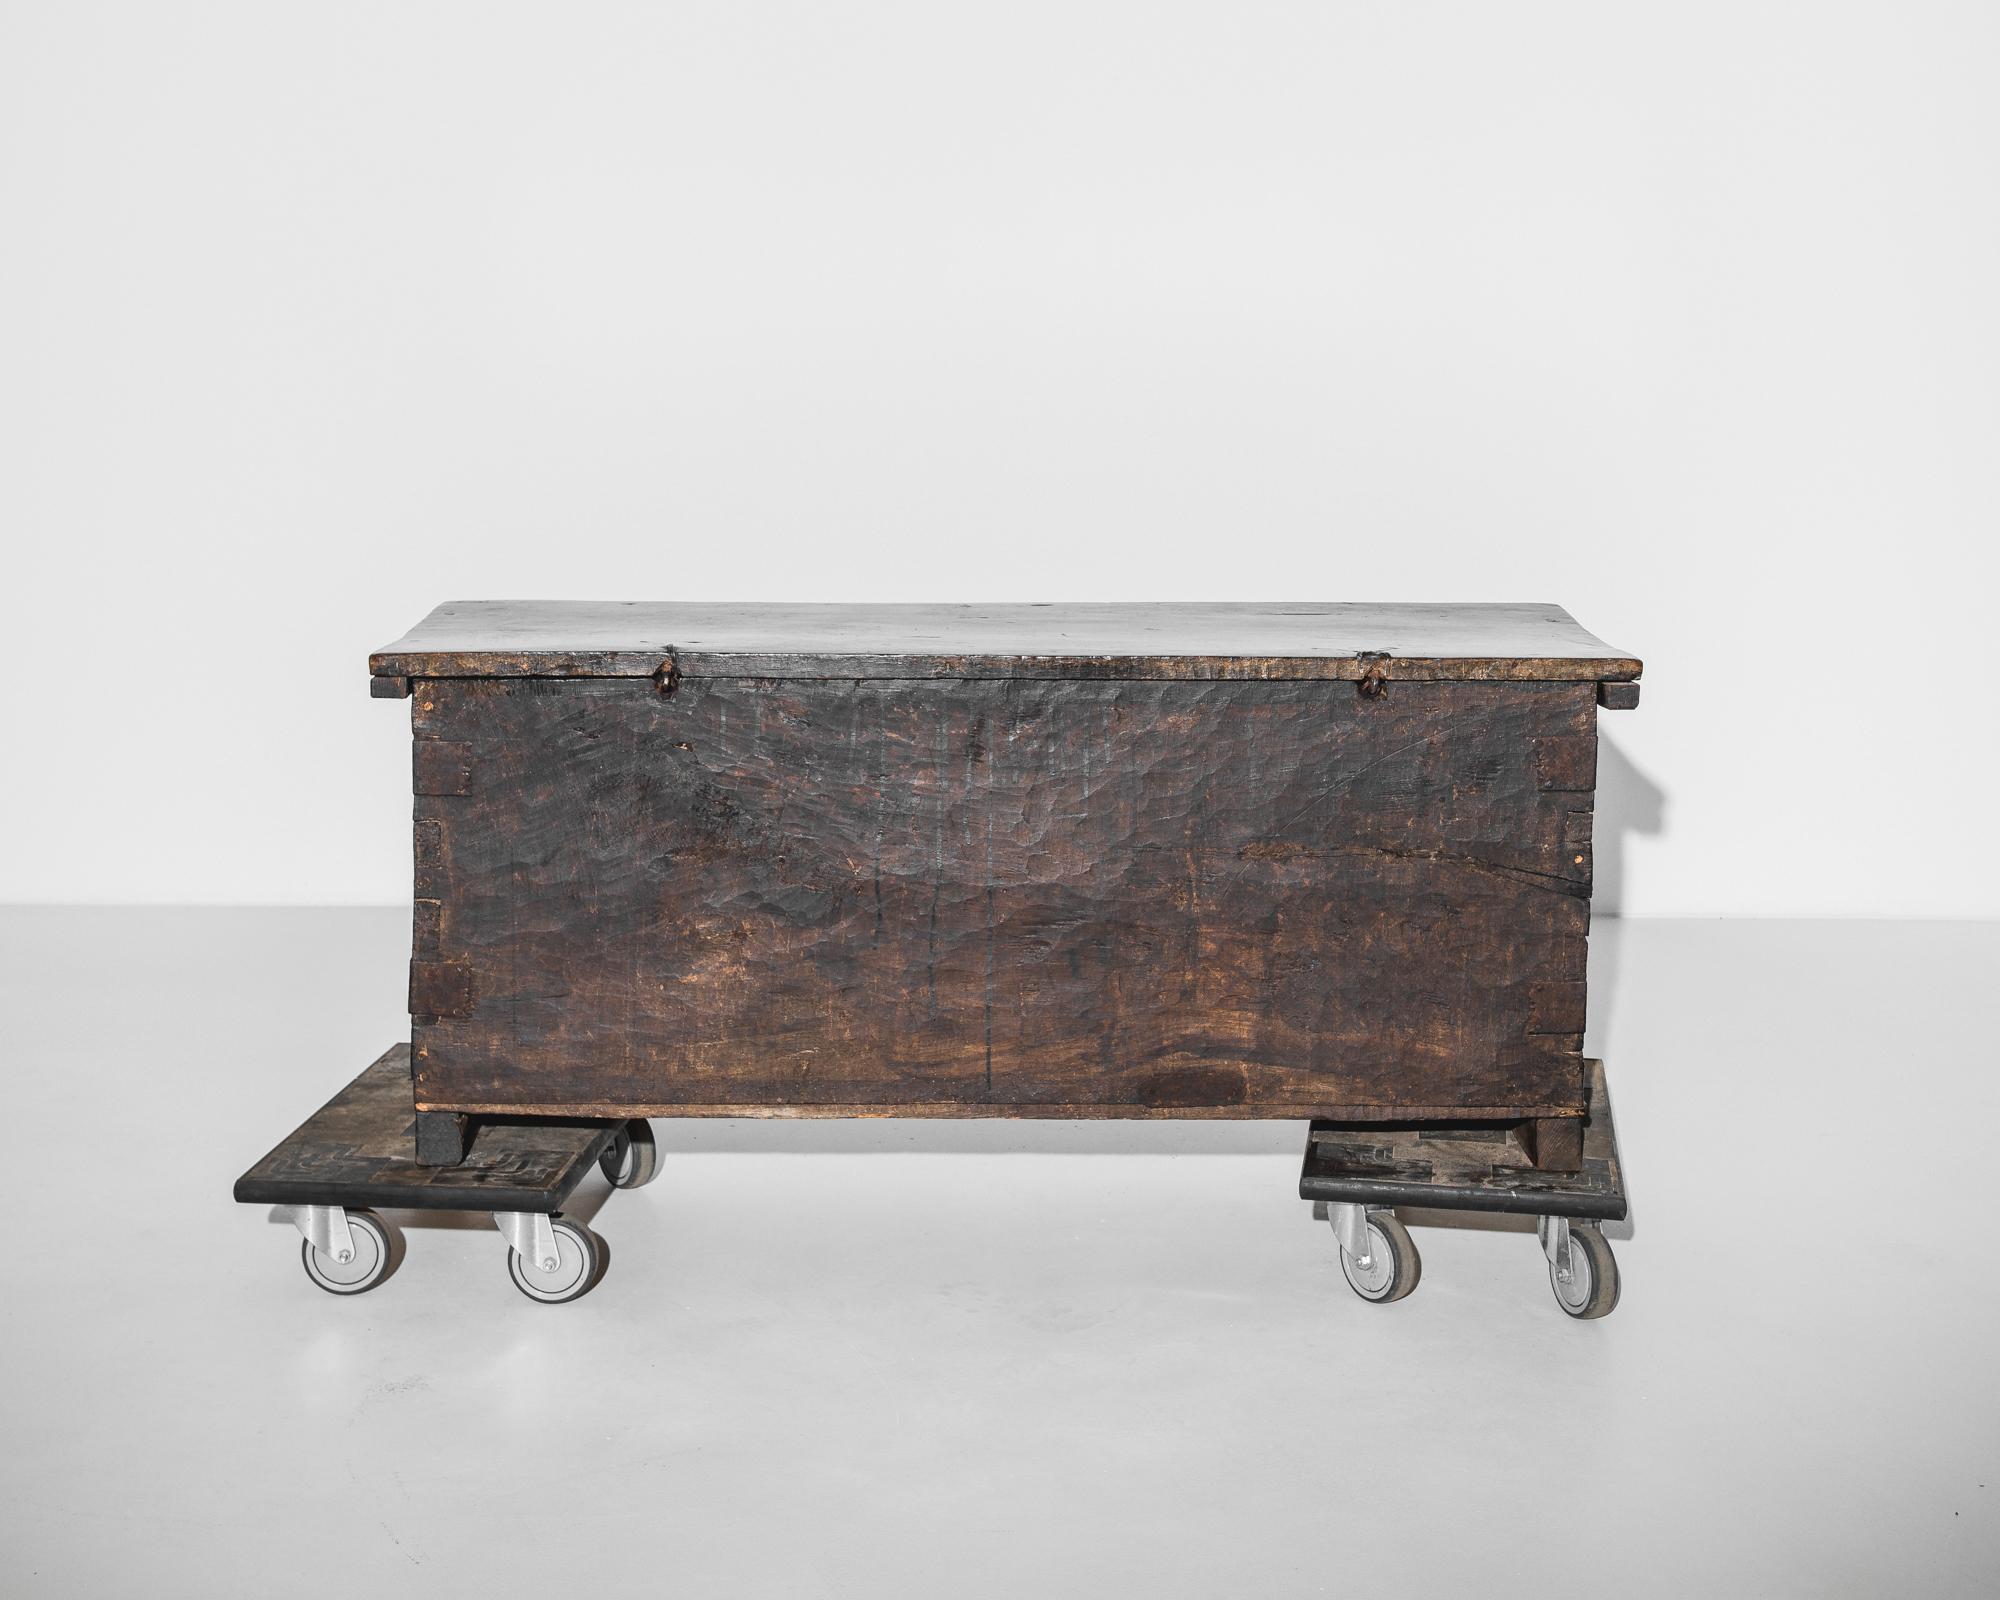 A wooden trunk from France, circa 1800, built in Neo-renaissance style. A crenellated apron and the deep, enigmatic color of the original patina lends a gothic inflection. The rough-hewn texture of the chest creates textural appeal, while the